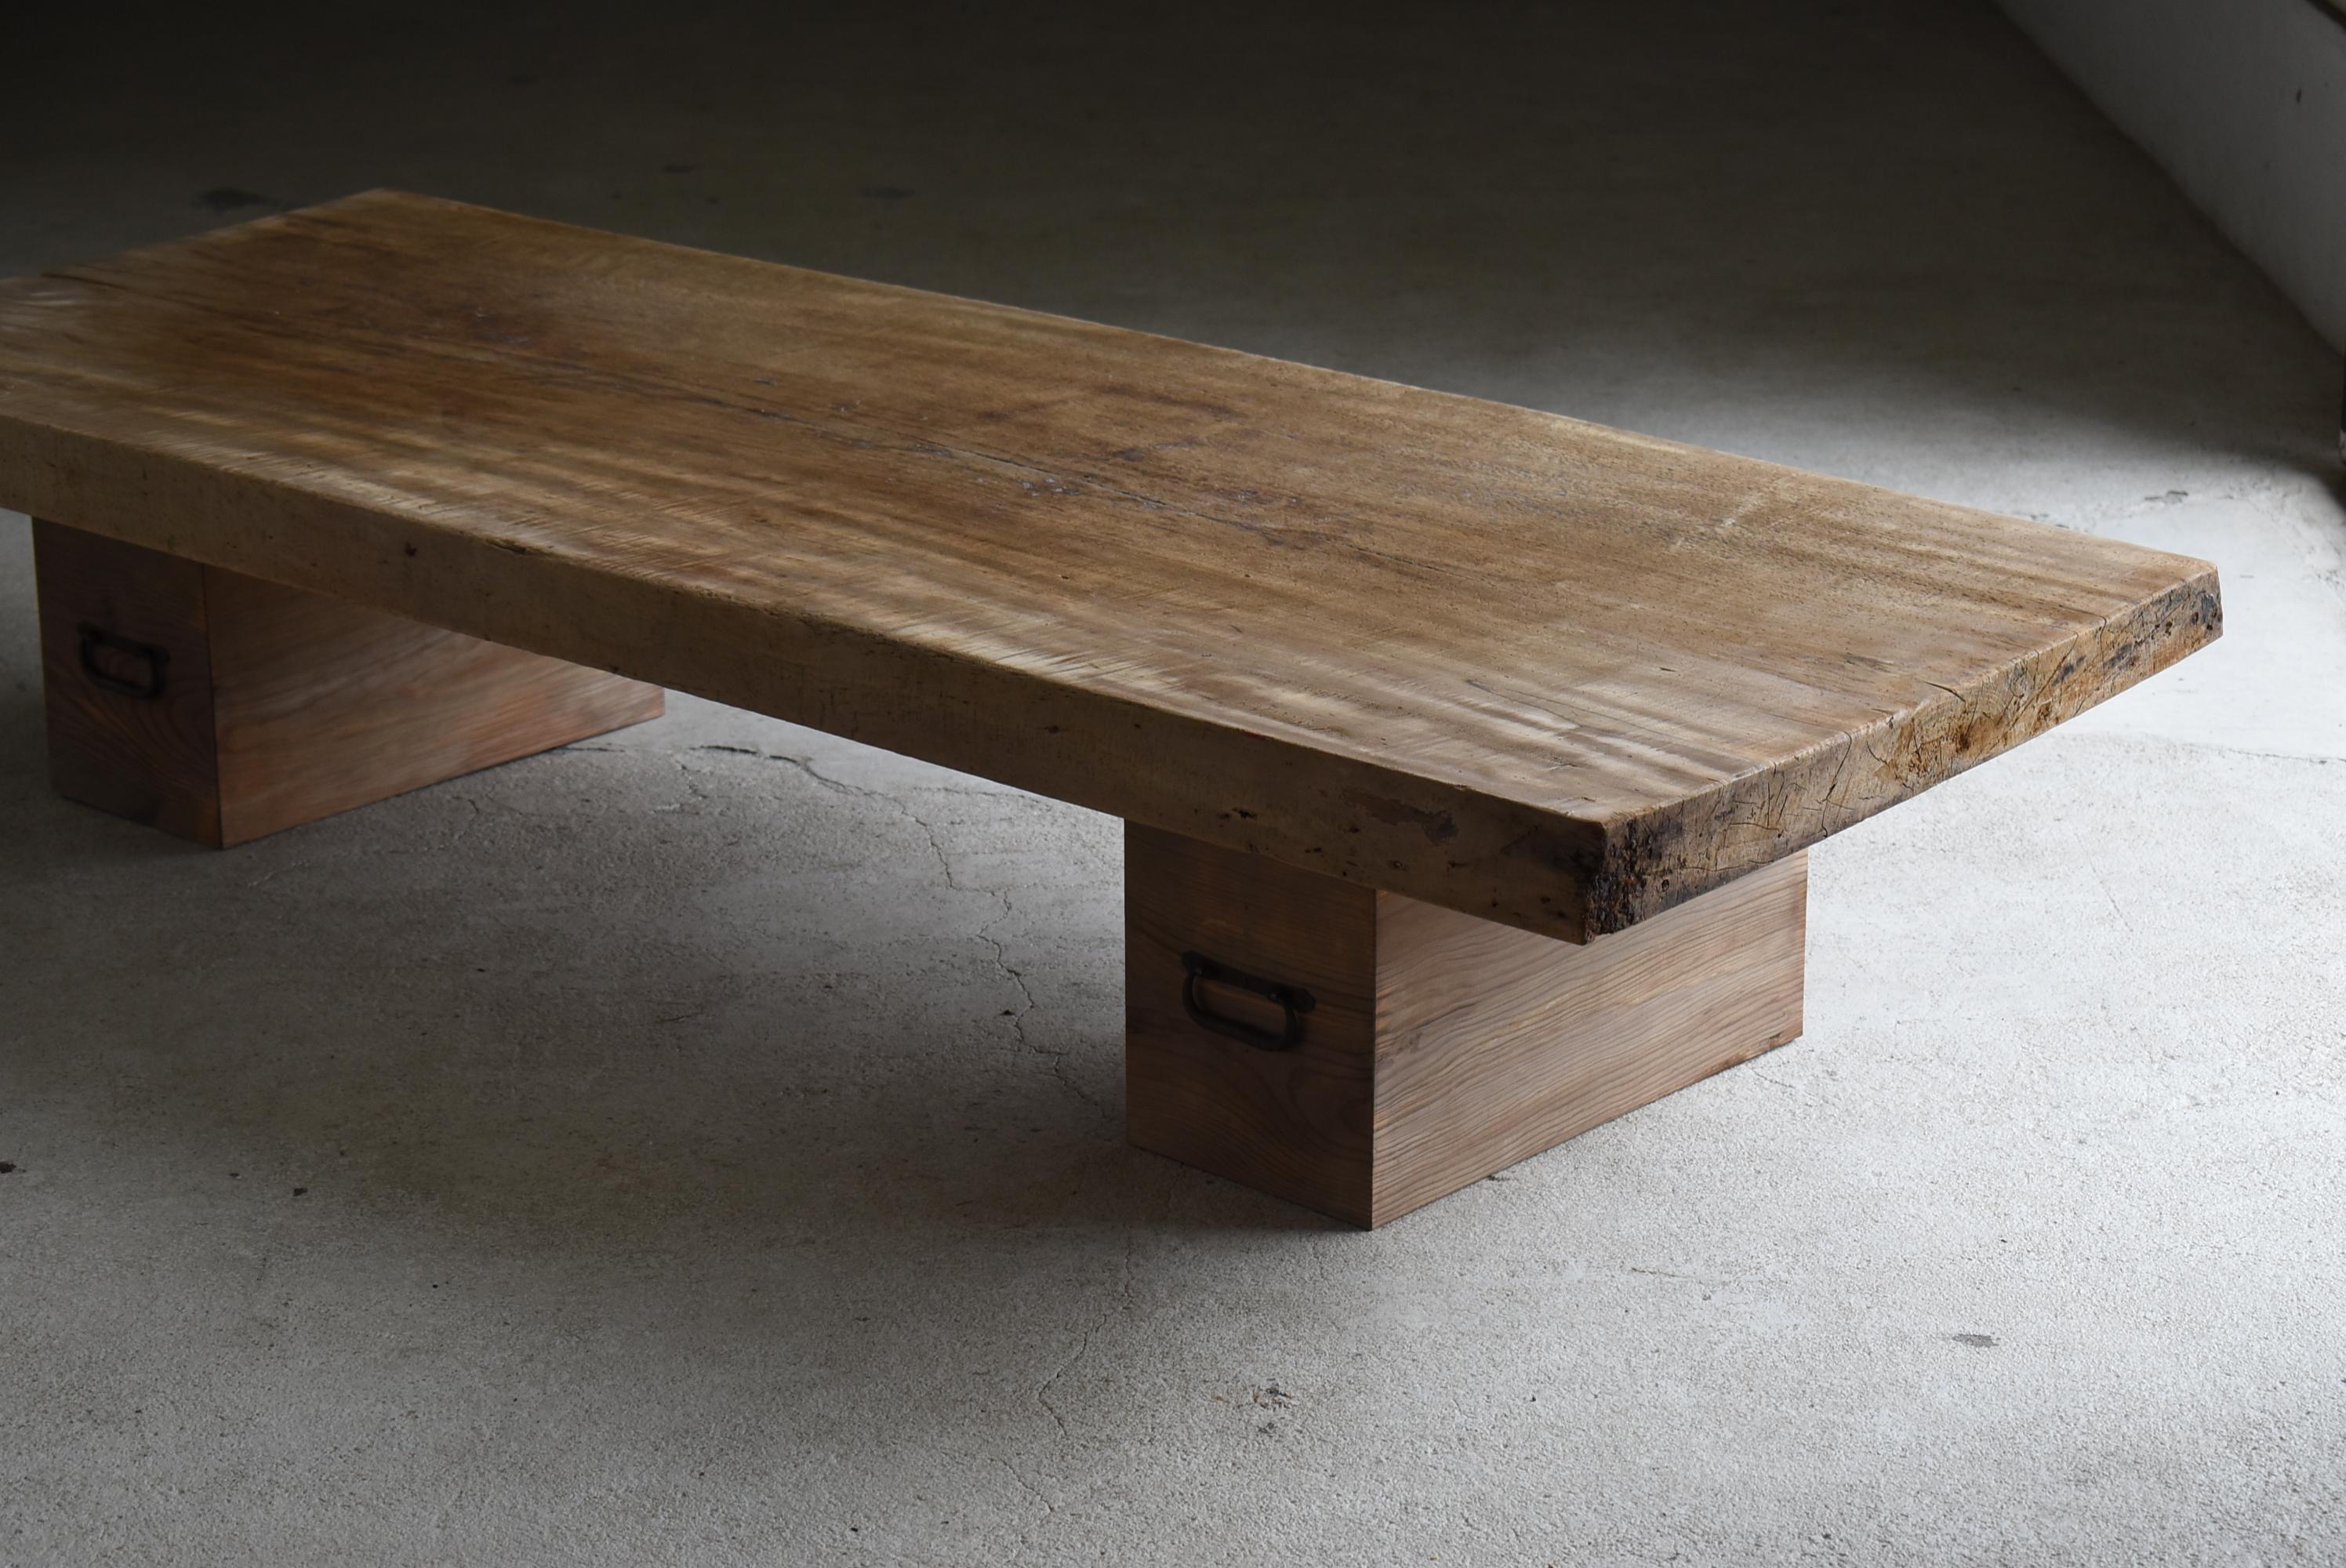 20th Century Japanese Antique Large Low Table 1900s-1940s / Sofa Table Wabi Sabi For Sale